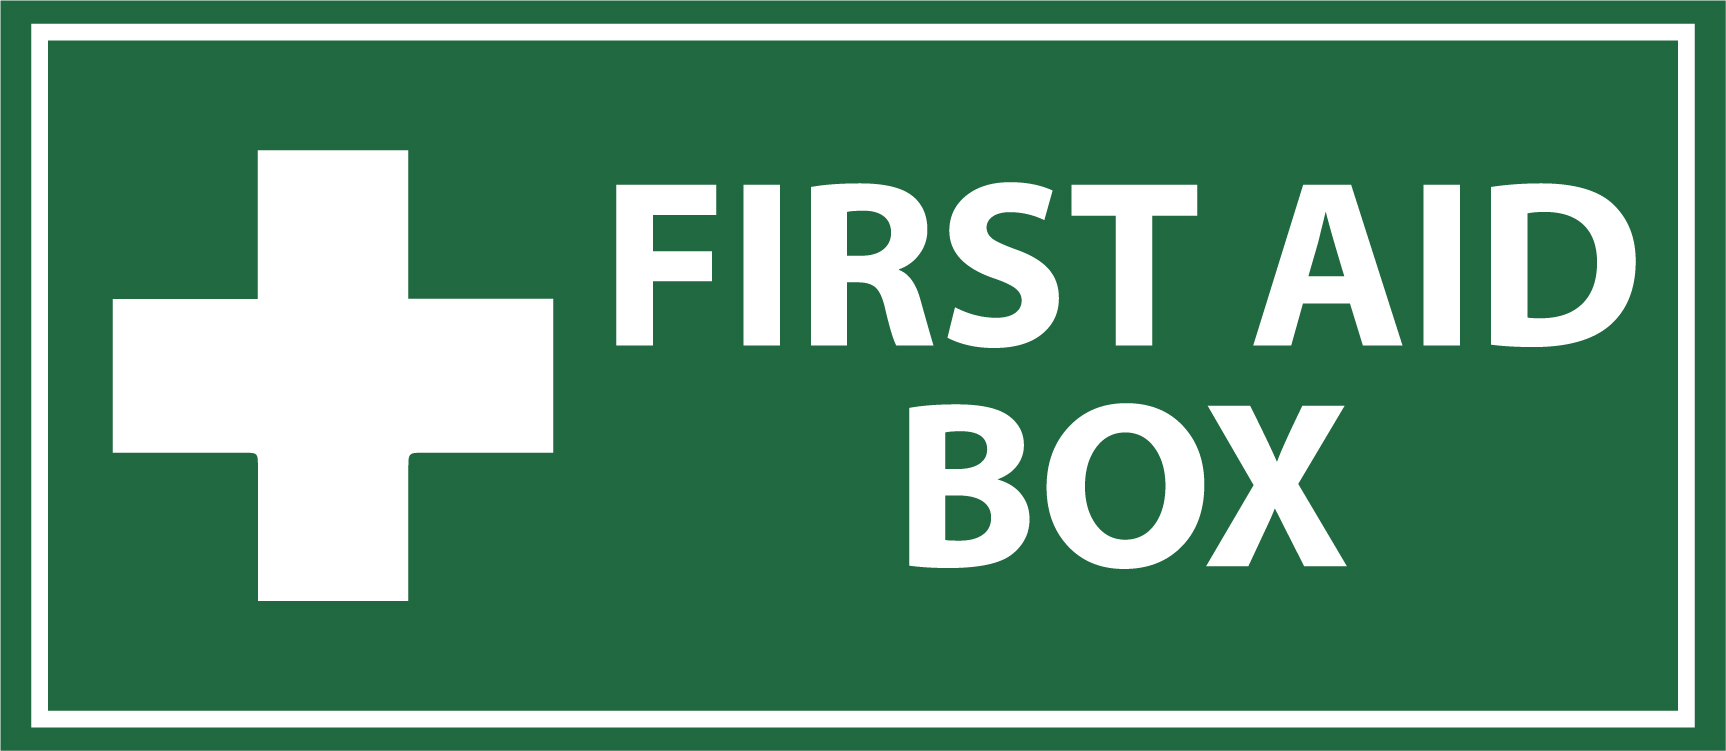 Safety “First Aid Box” Foam Sign Board – 11.5 in x 5 in